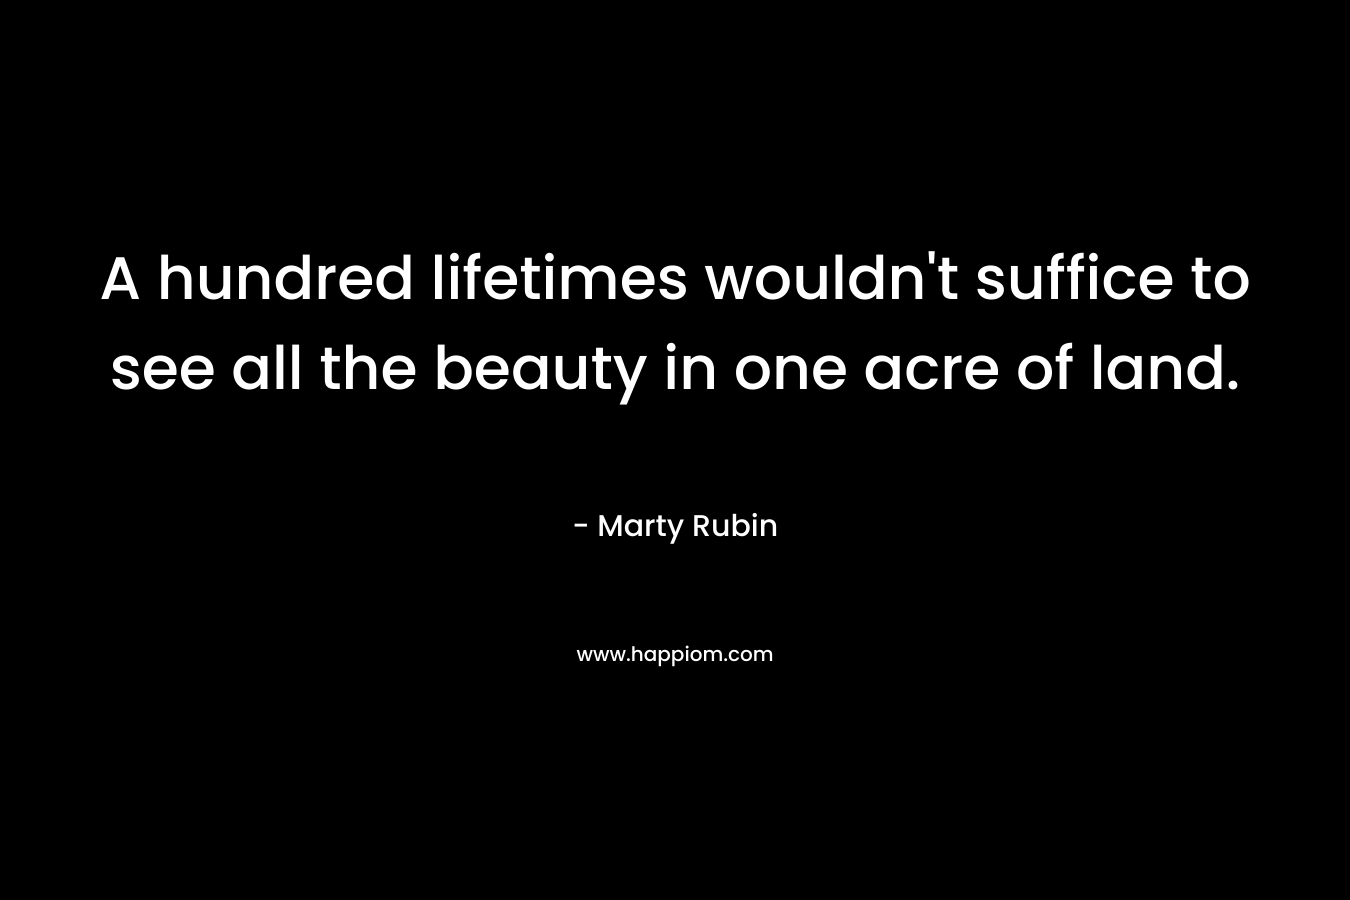 A hundred lifetimes wouldn’t suffice to see all the beauty in one acre of land. – Marty Rubin